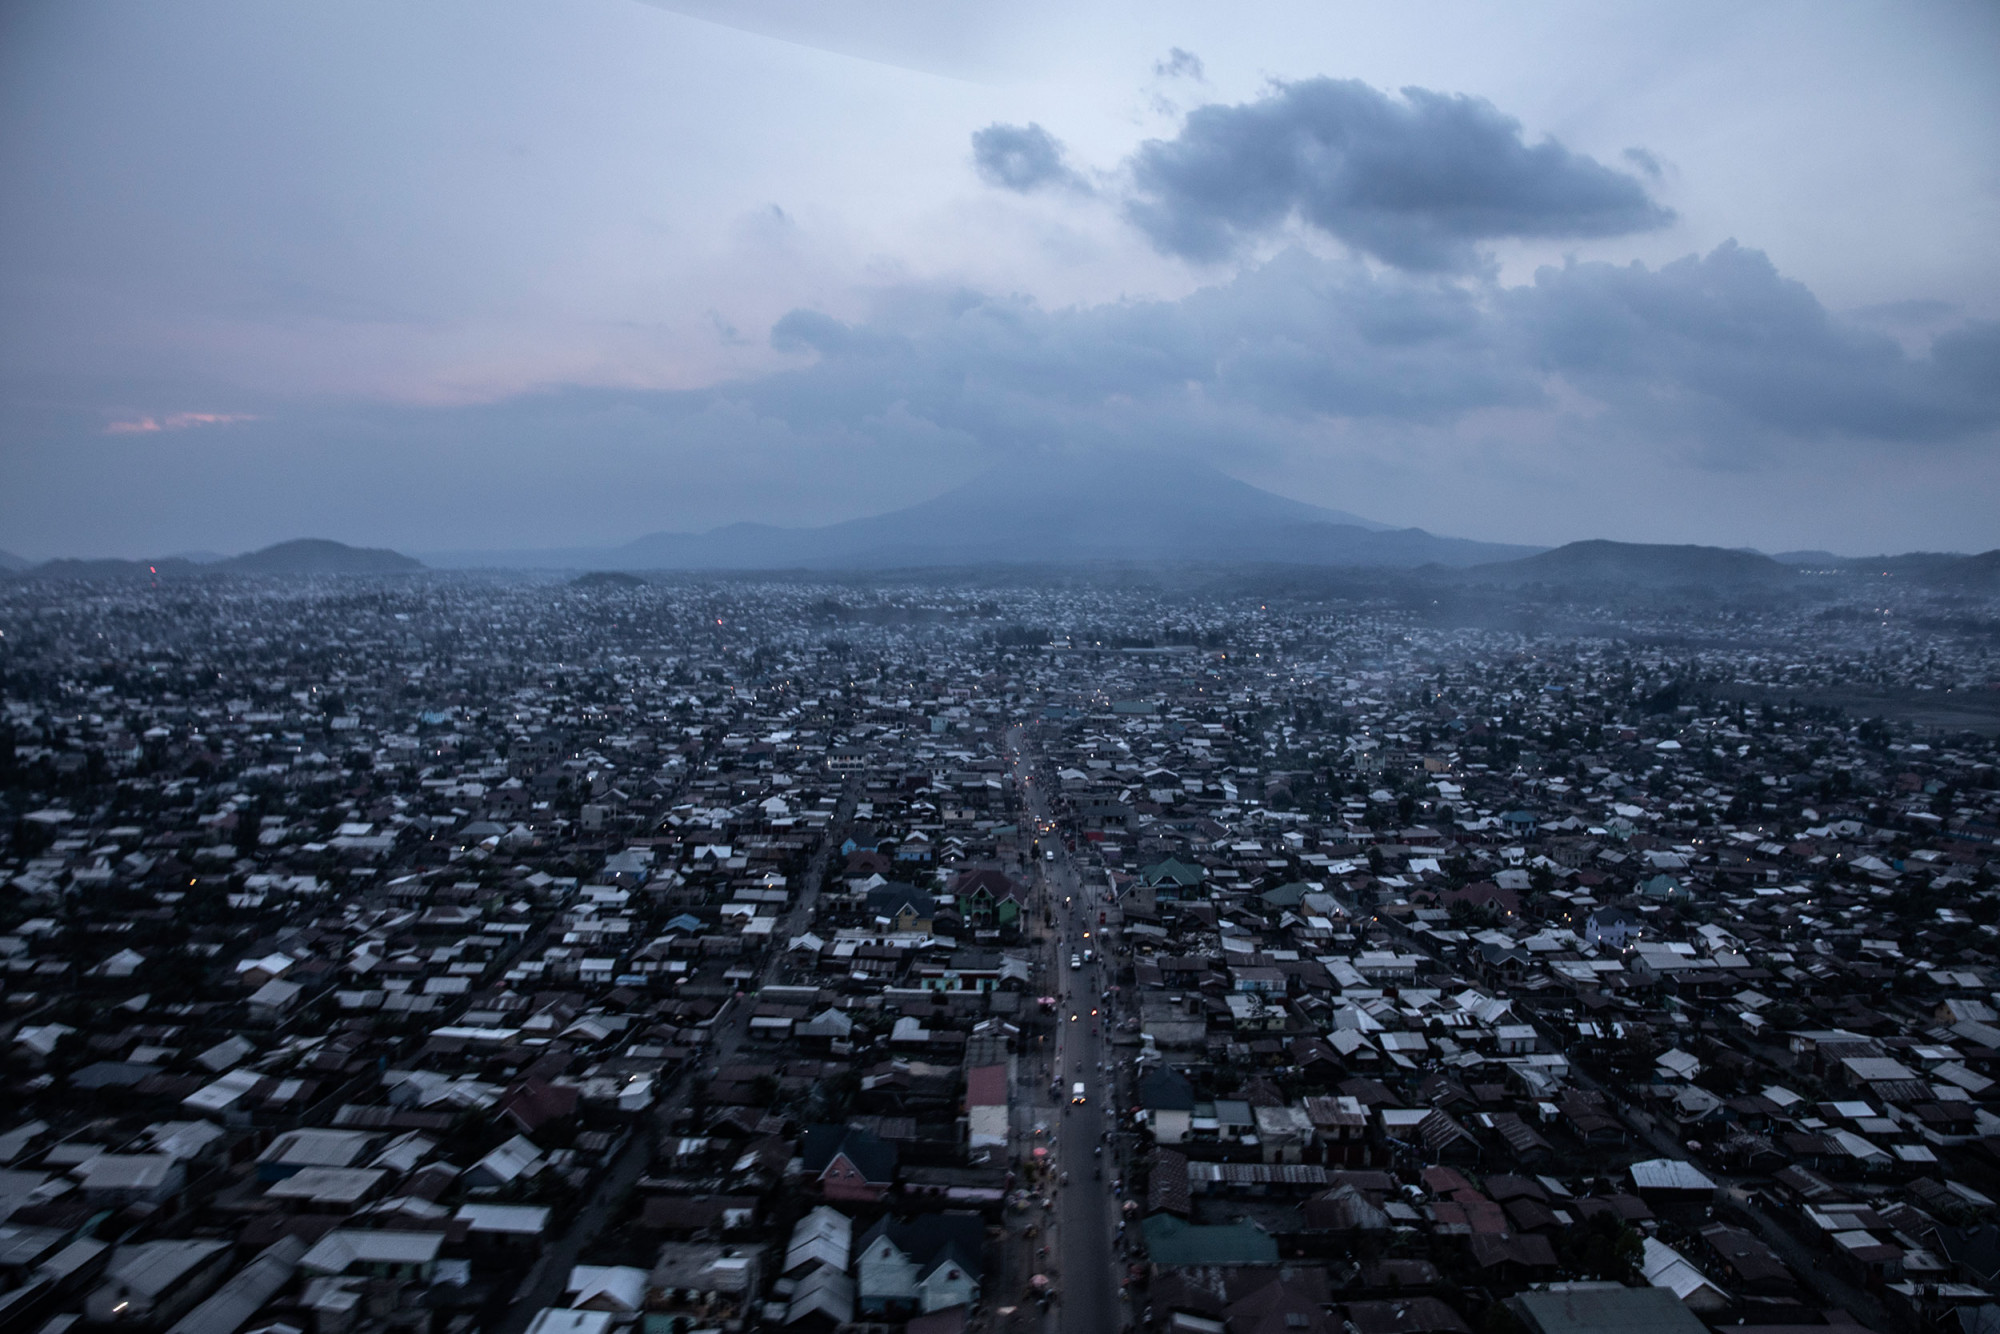 Mount Nyiragongo looms above the city of Goma in eastern Democratic of Congo on Sunday May 30, eight days after the eruption. © Finbarr O’Reilly for Fondation Carmignac